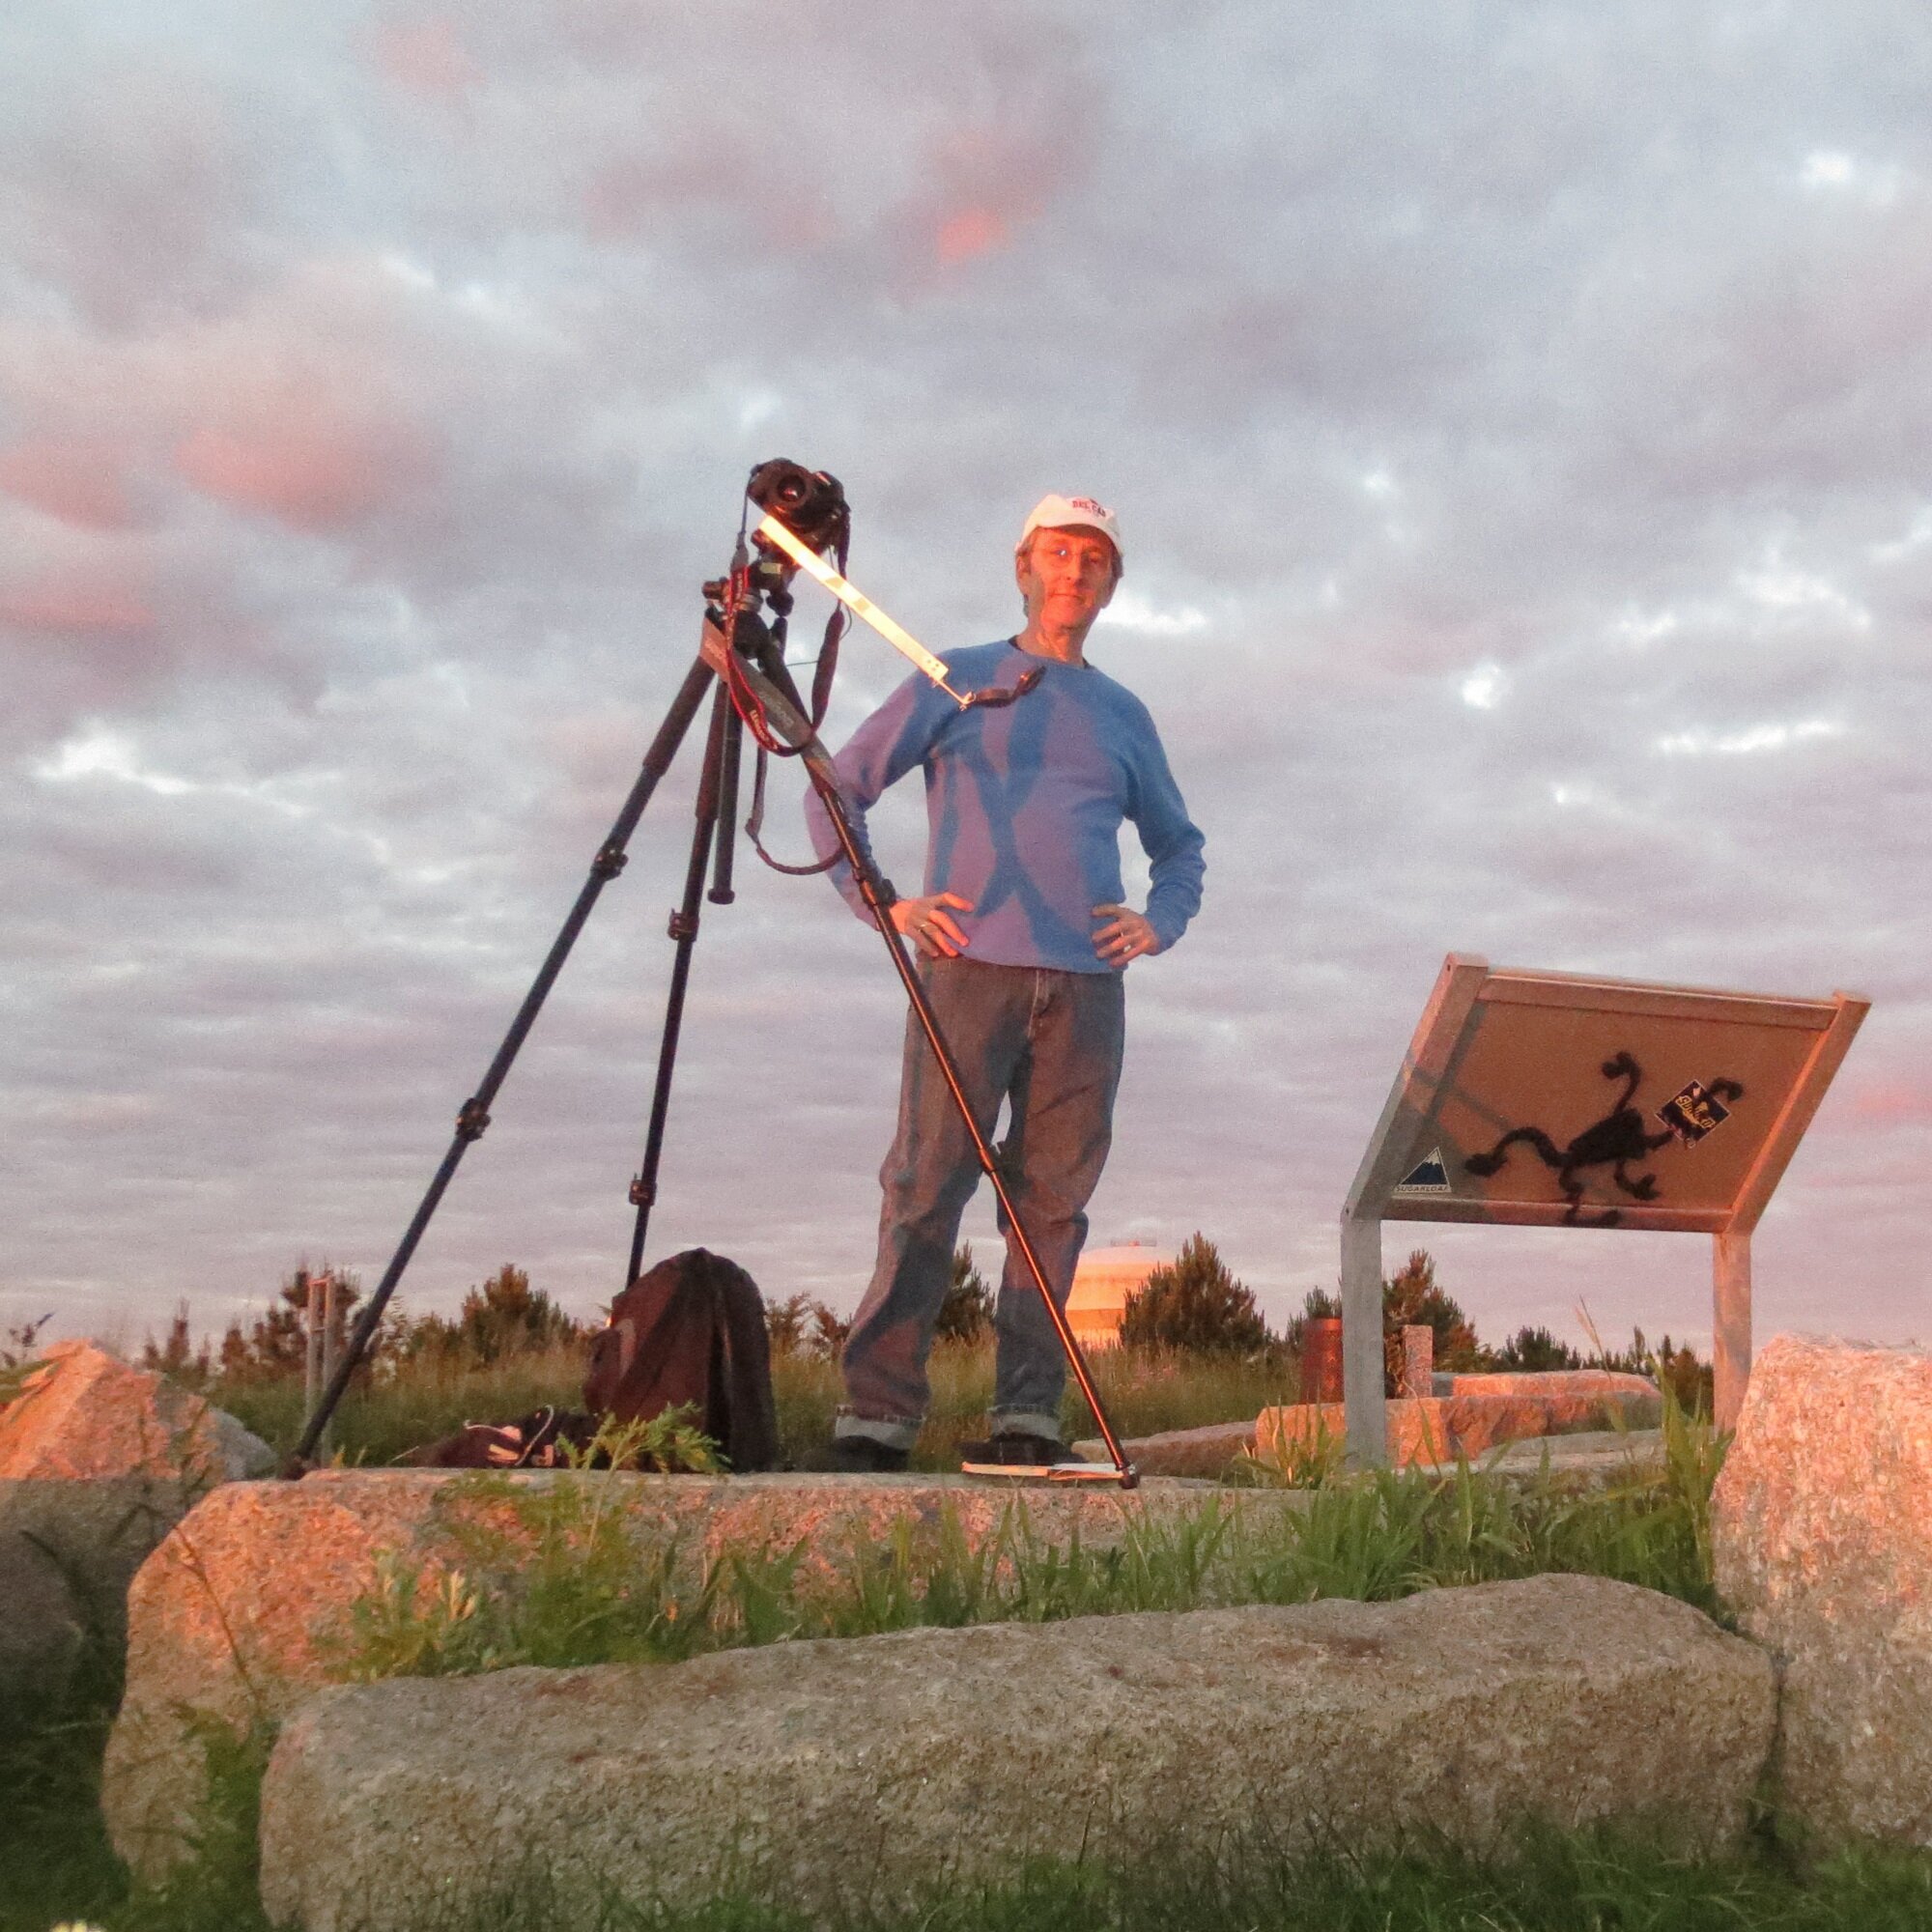 image: photographing a sunset from Deer Island for the series "curve of the Earth"